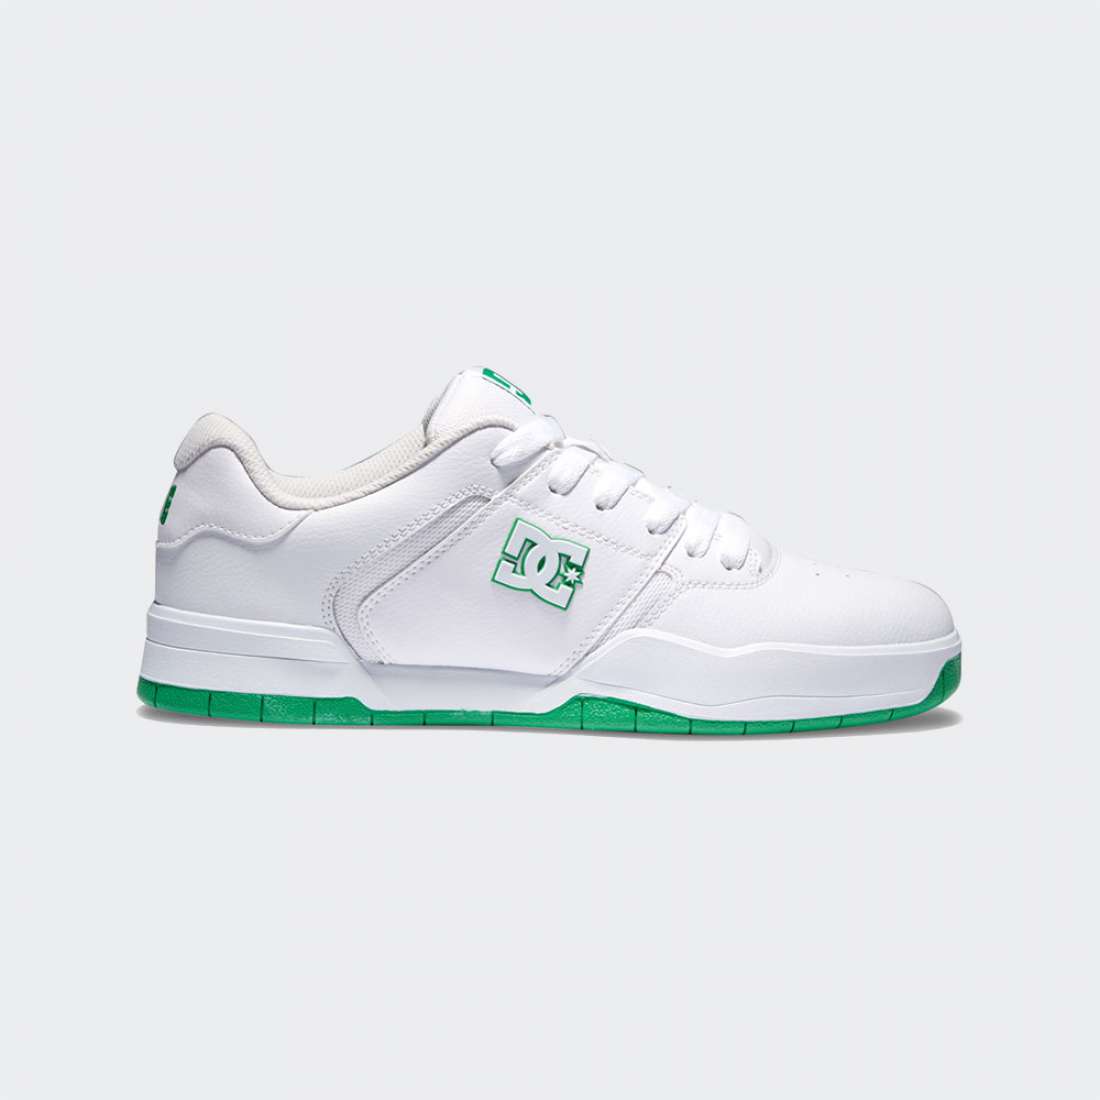 DC CENTRAL WHITE/GREEN